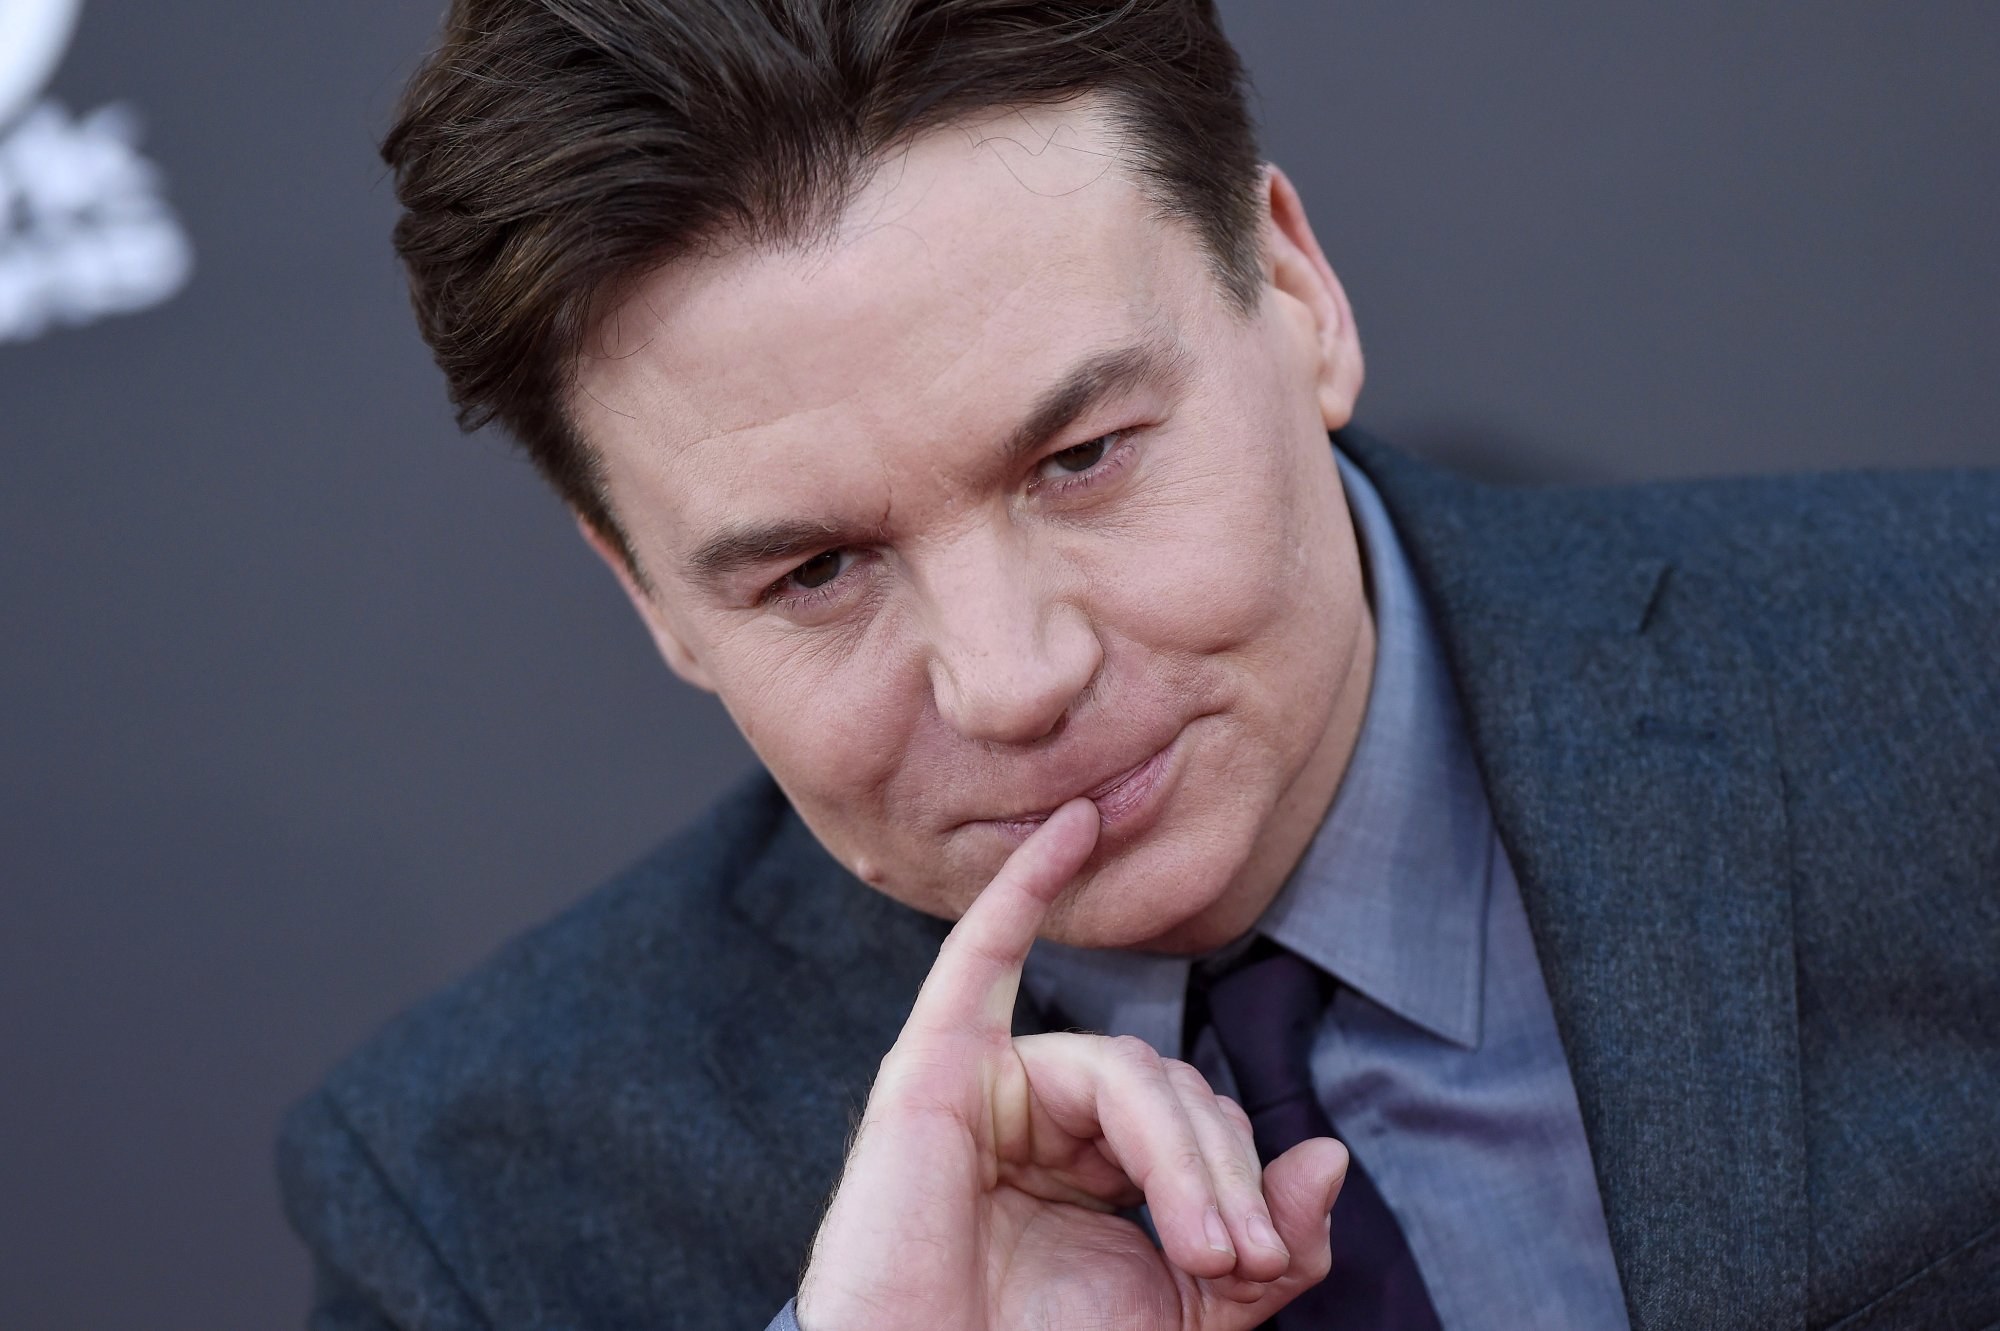 'Austin Powers 4' potential star Mike Myers holding his pinky up to his lips and wearing a suit